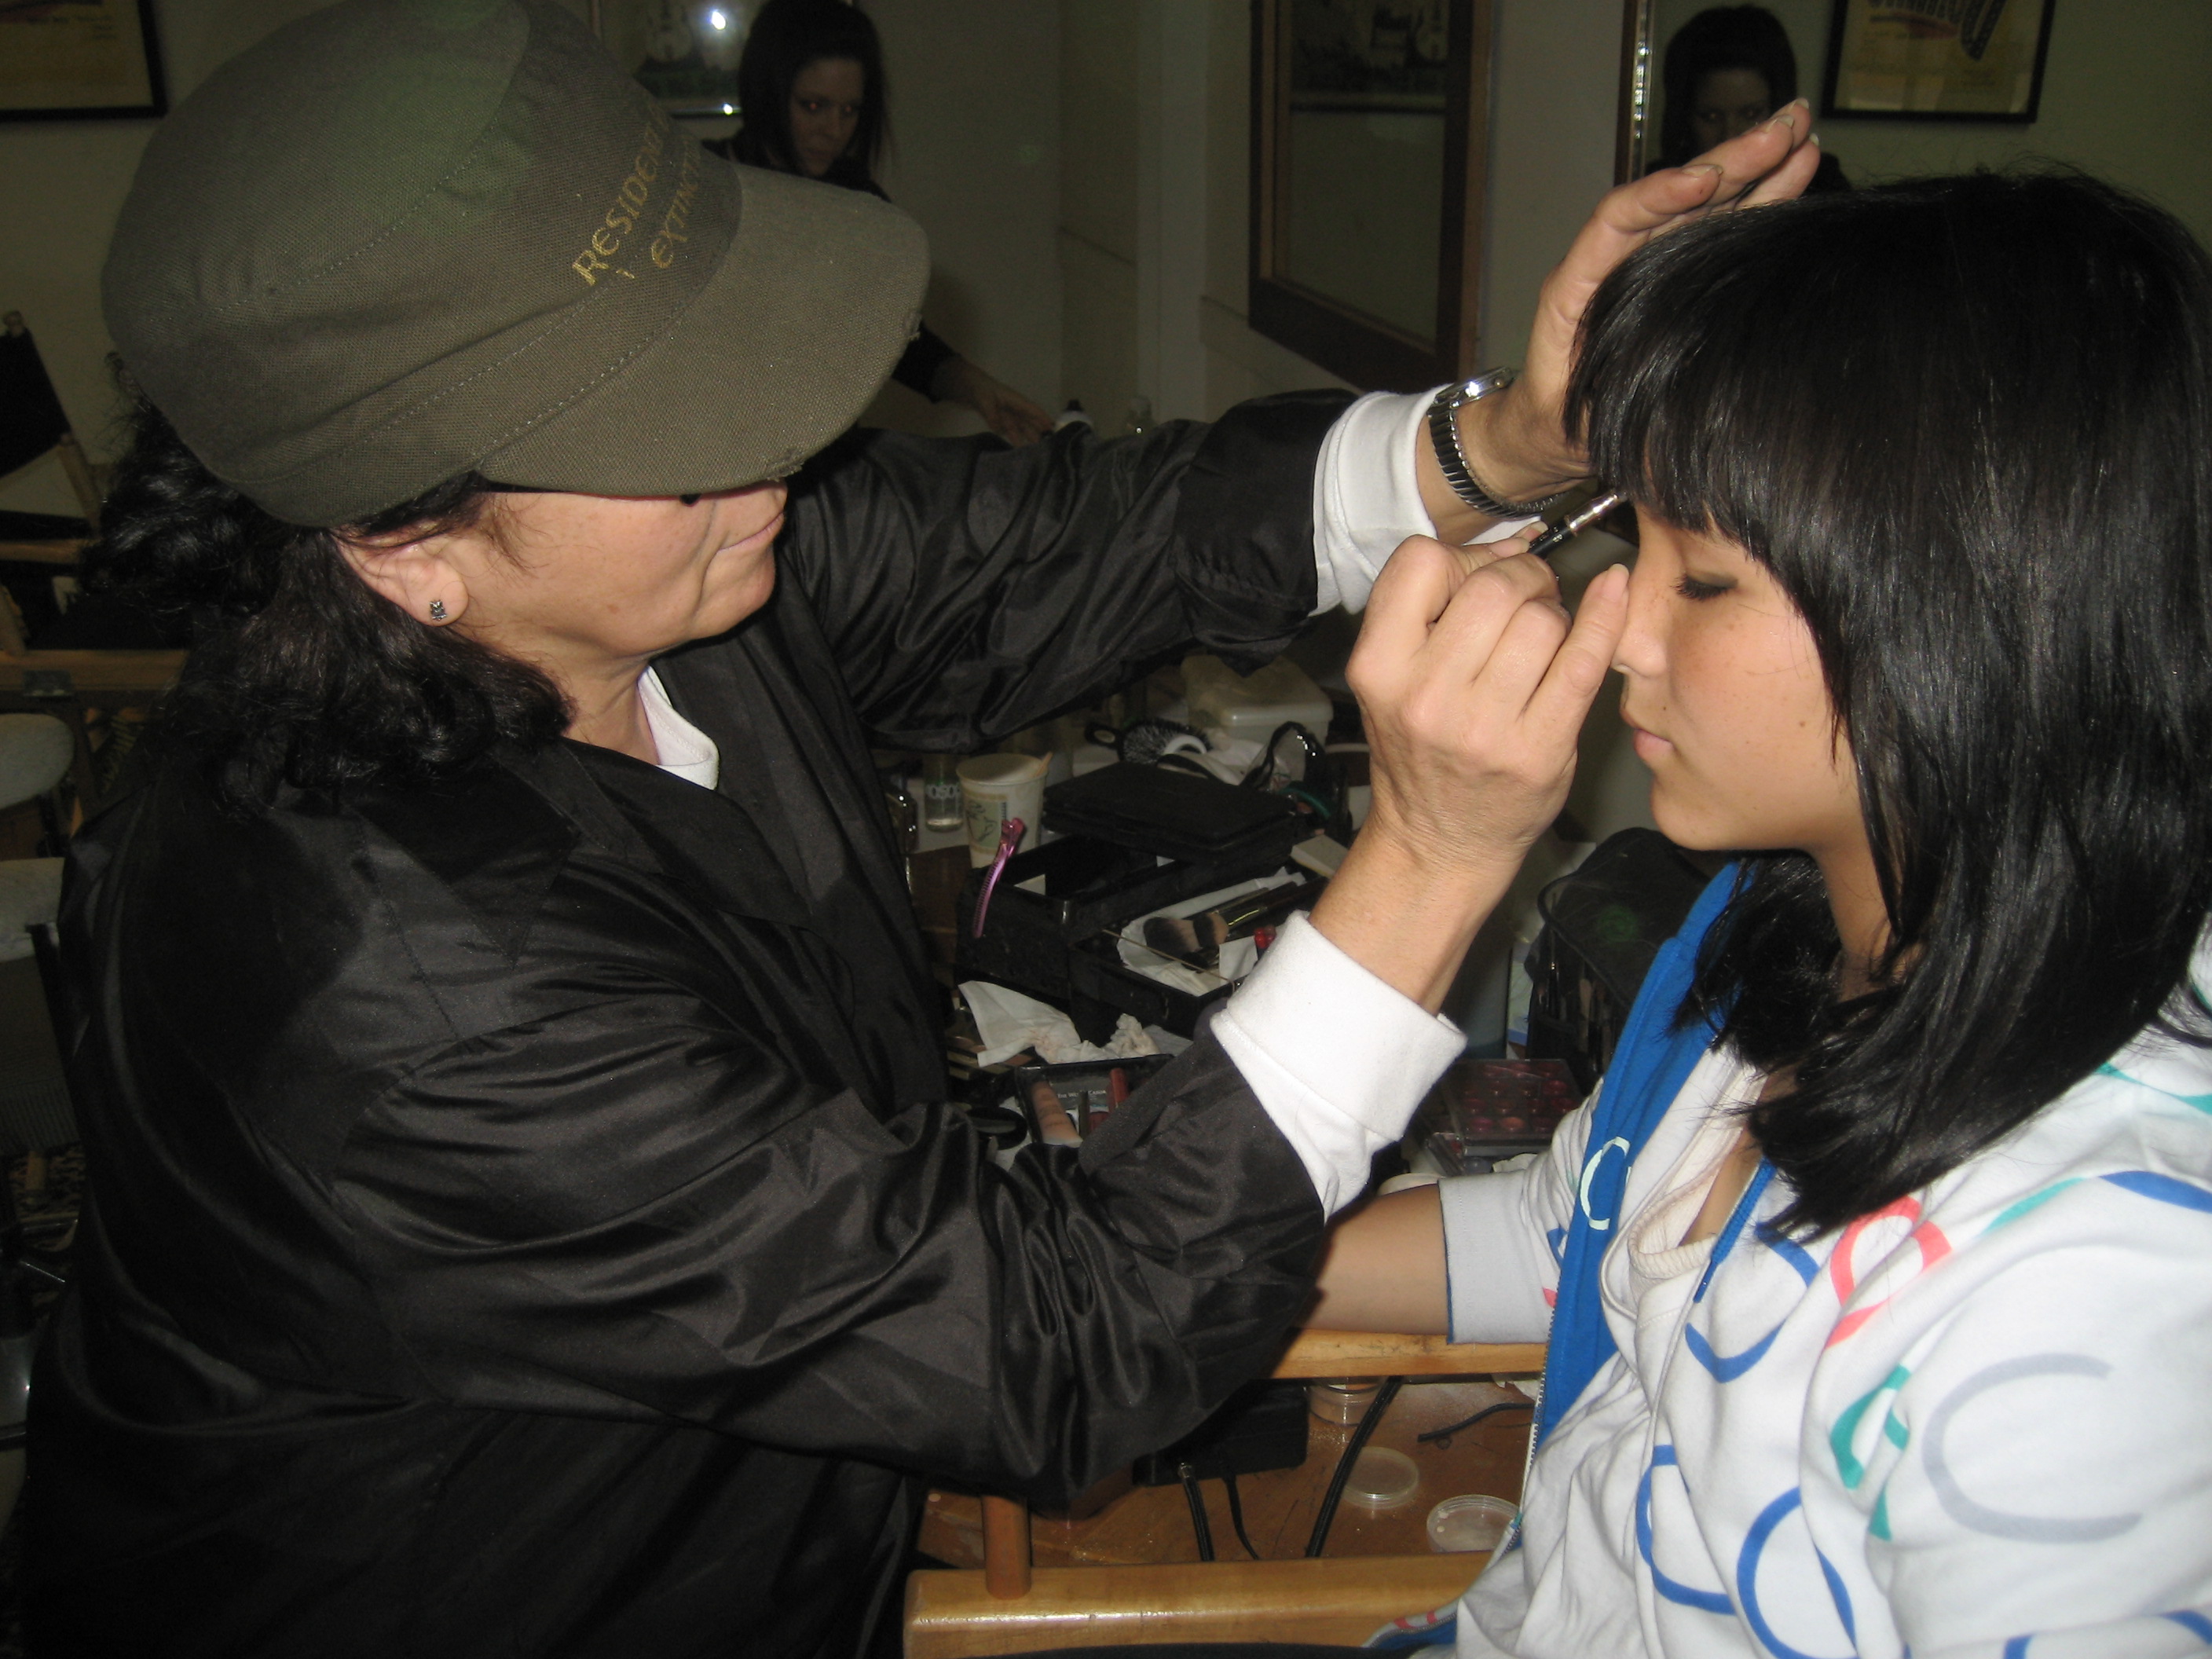 Amy Stoner Project Annie applying Makeup for Alyson Stoner Video